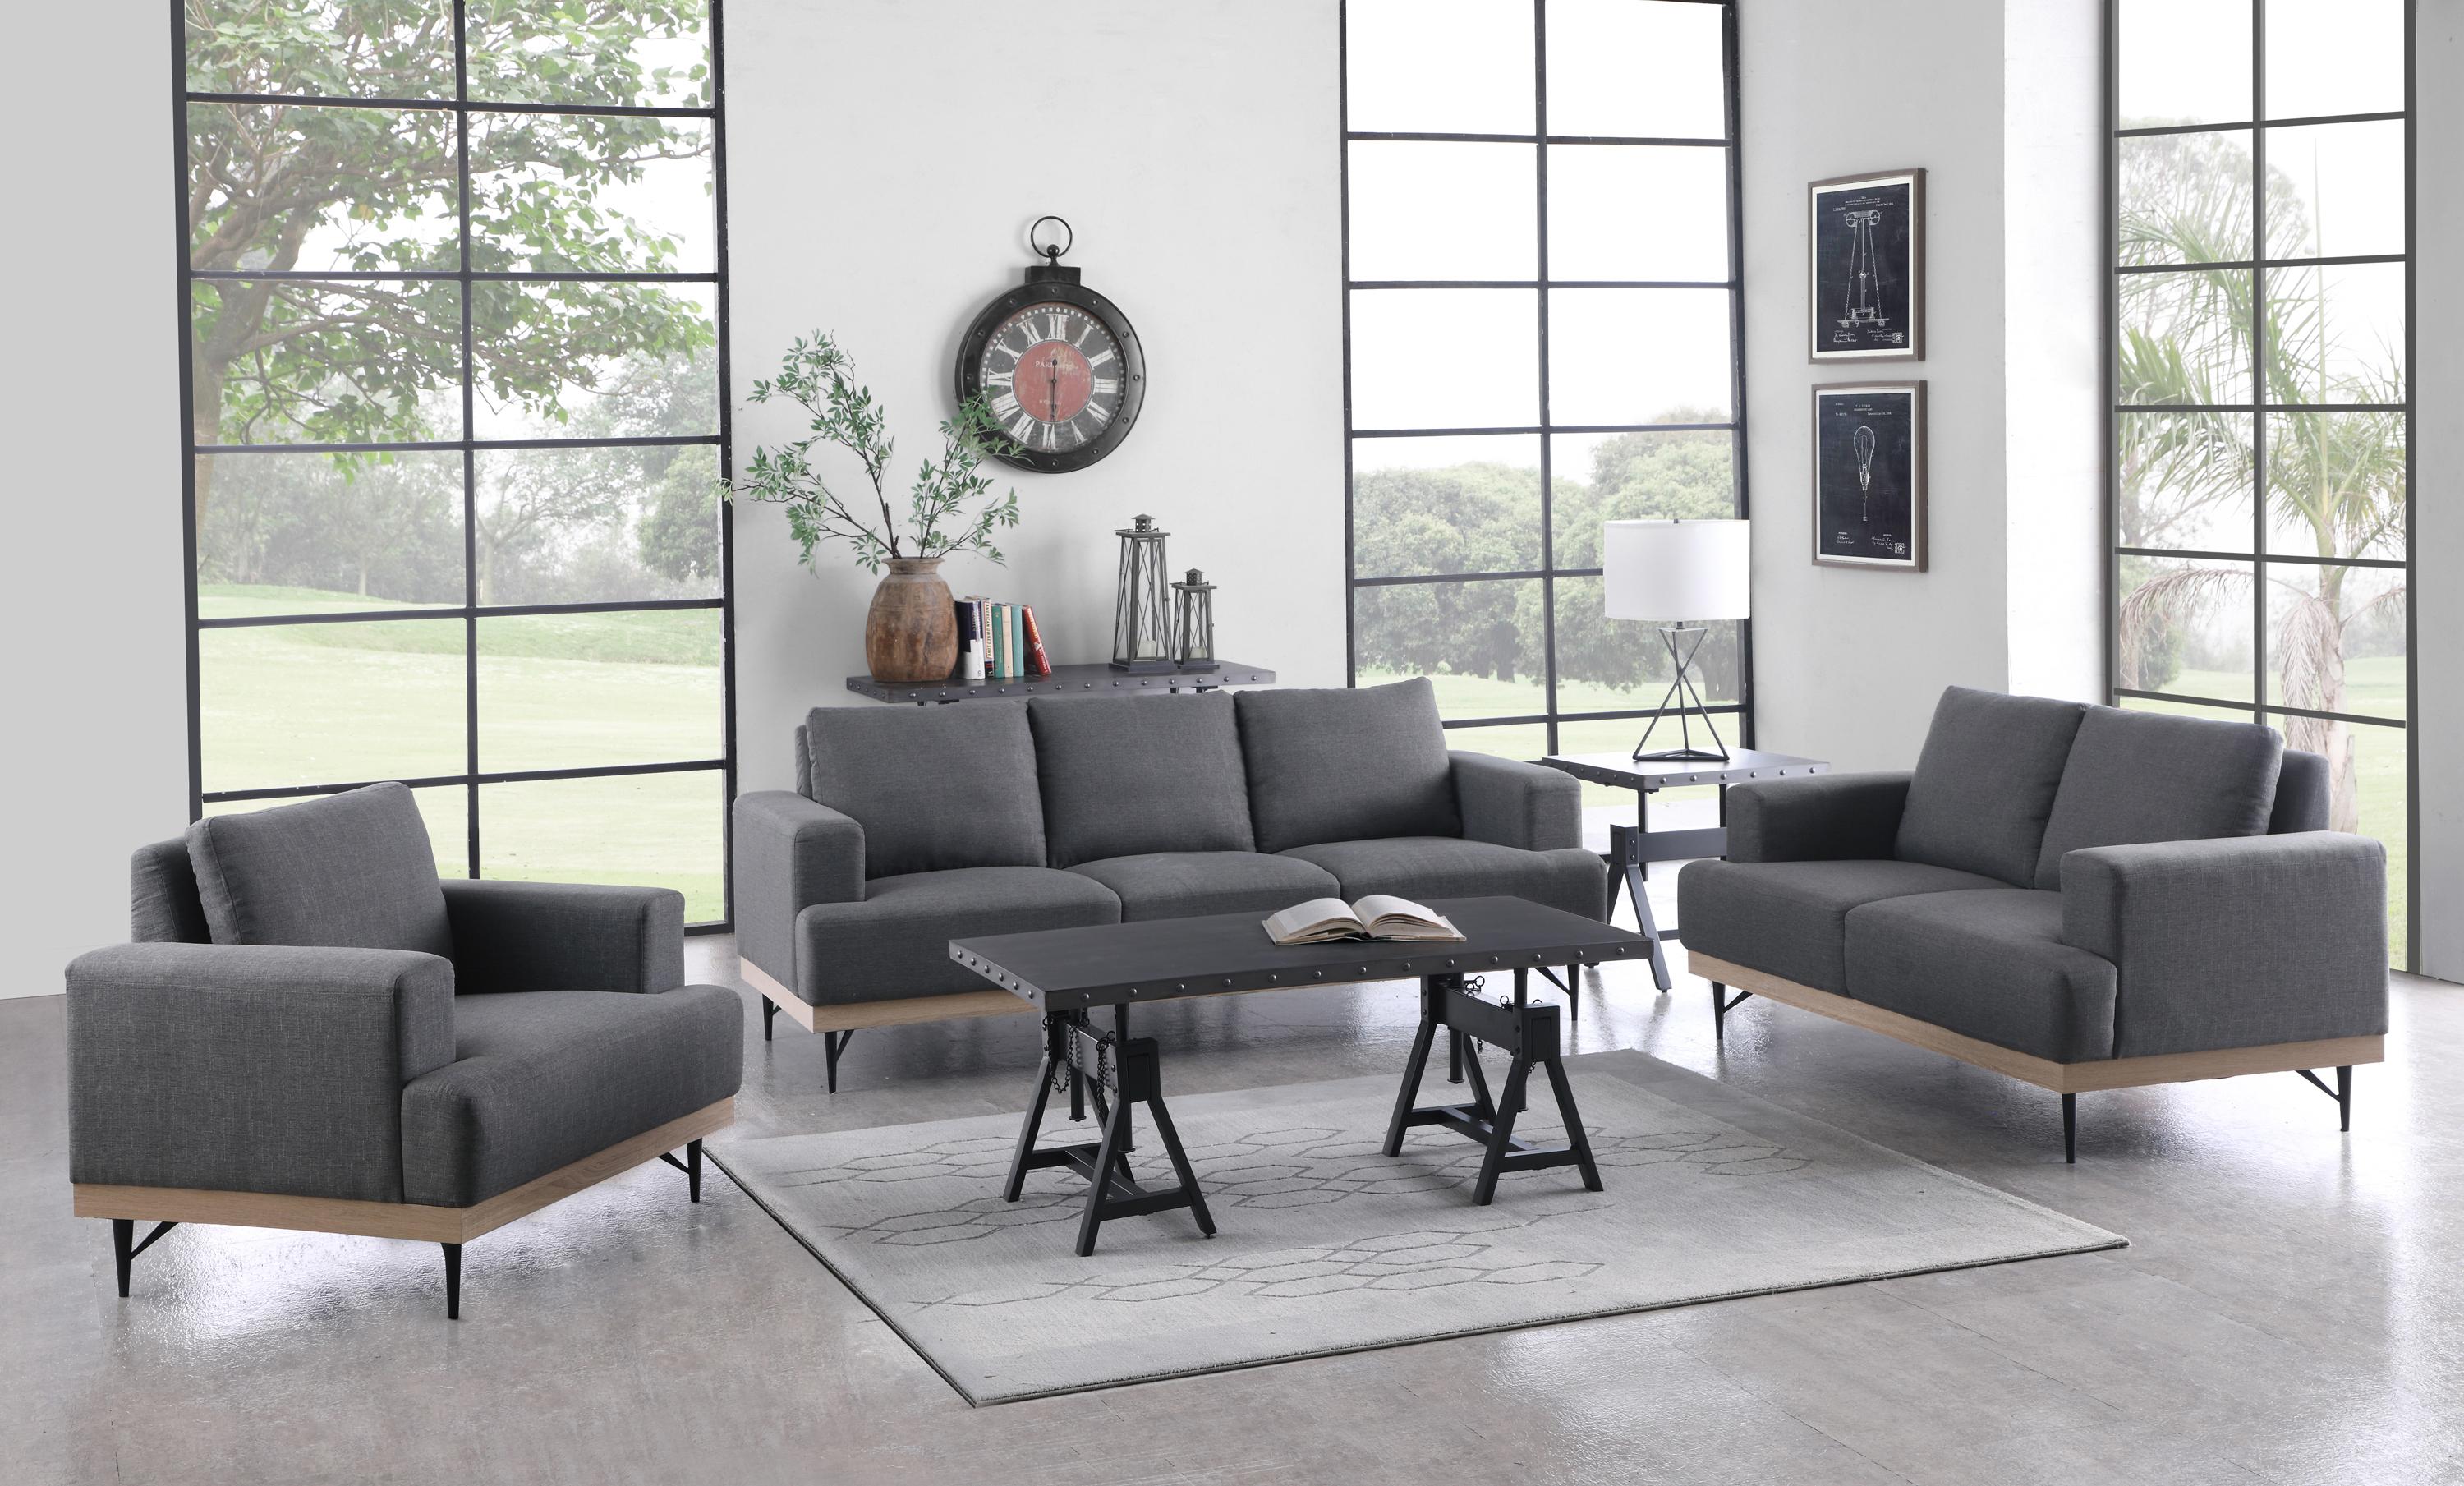 Transitional Living Room Set 509187-S2 Kester 509187-S2 in Charcoal Faux Linen